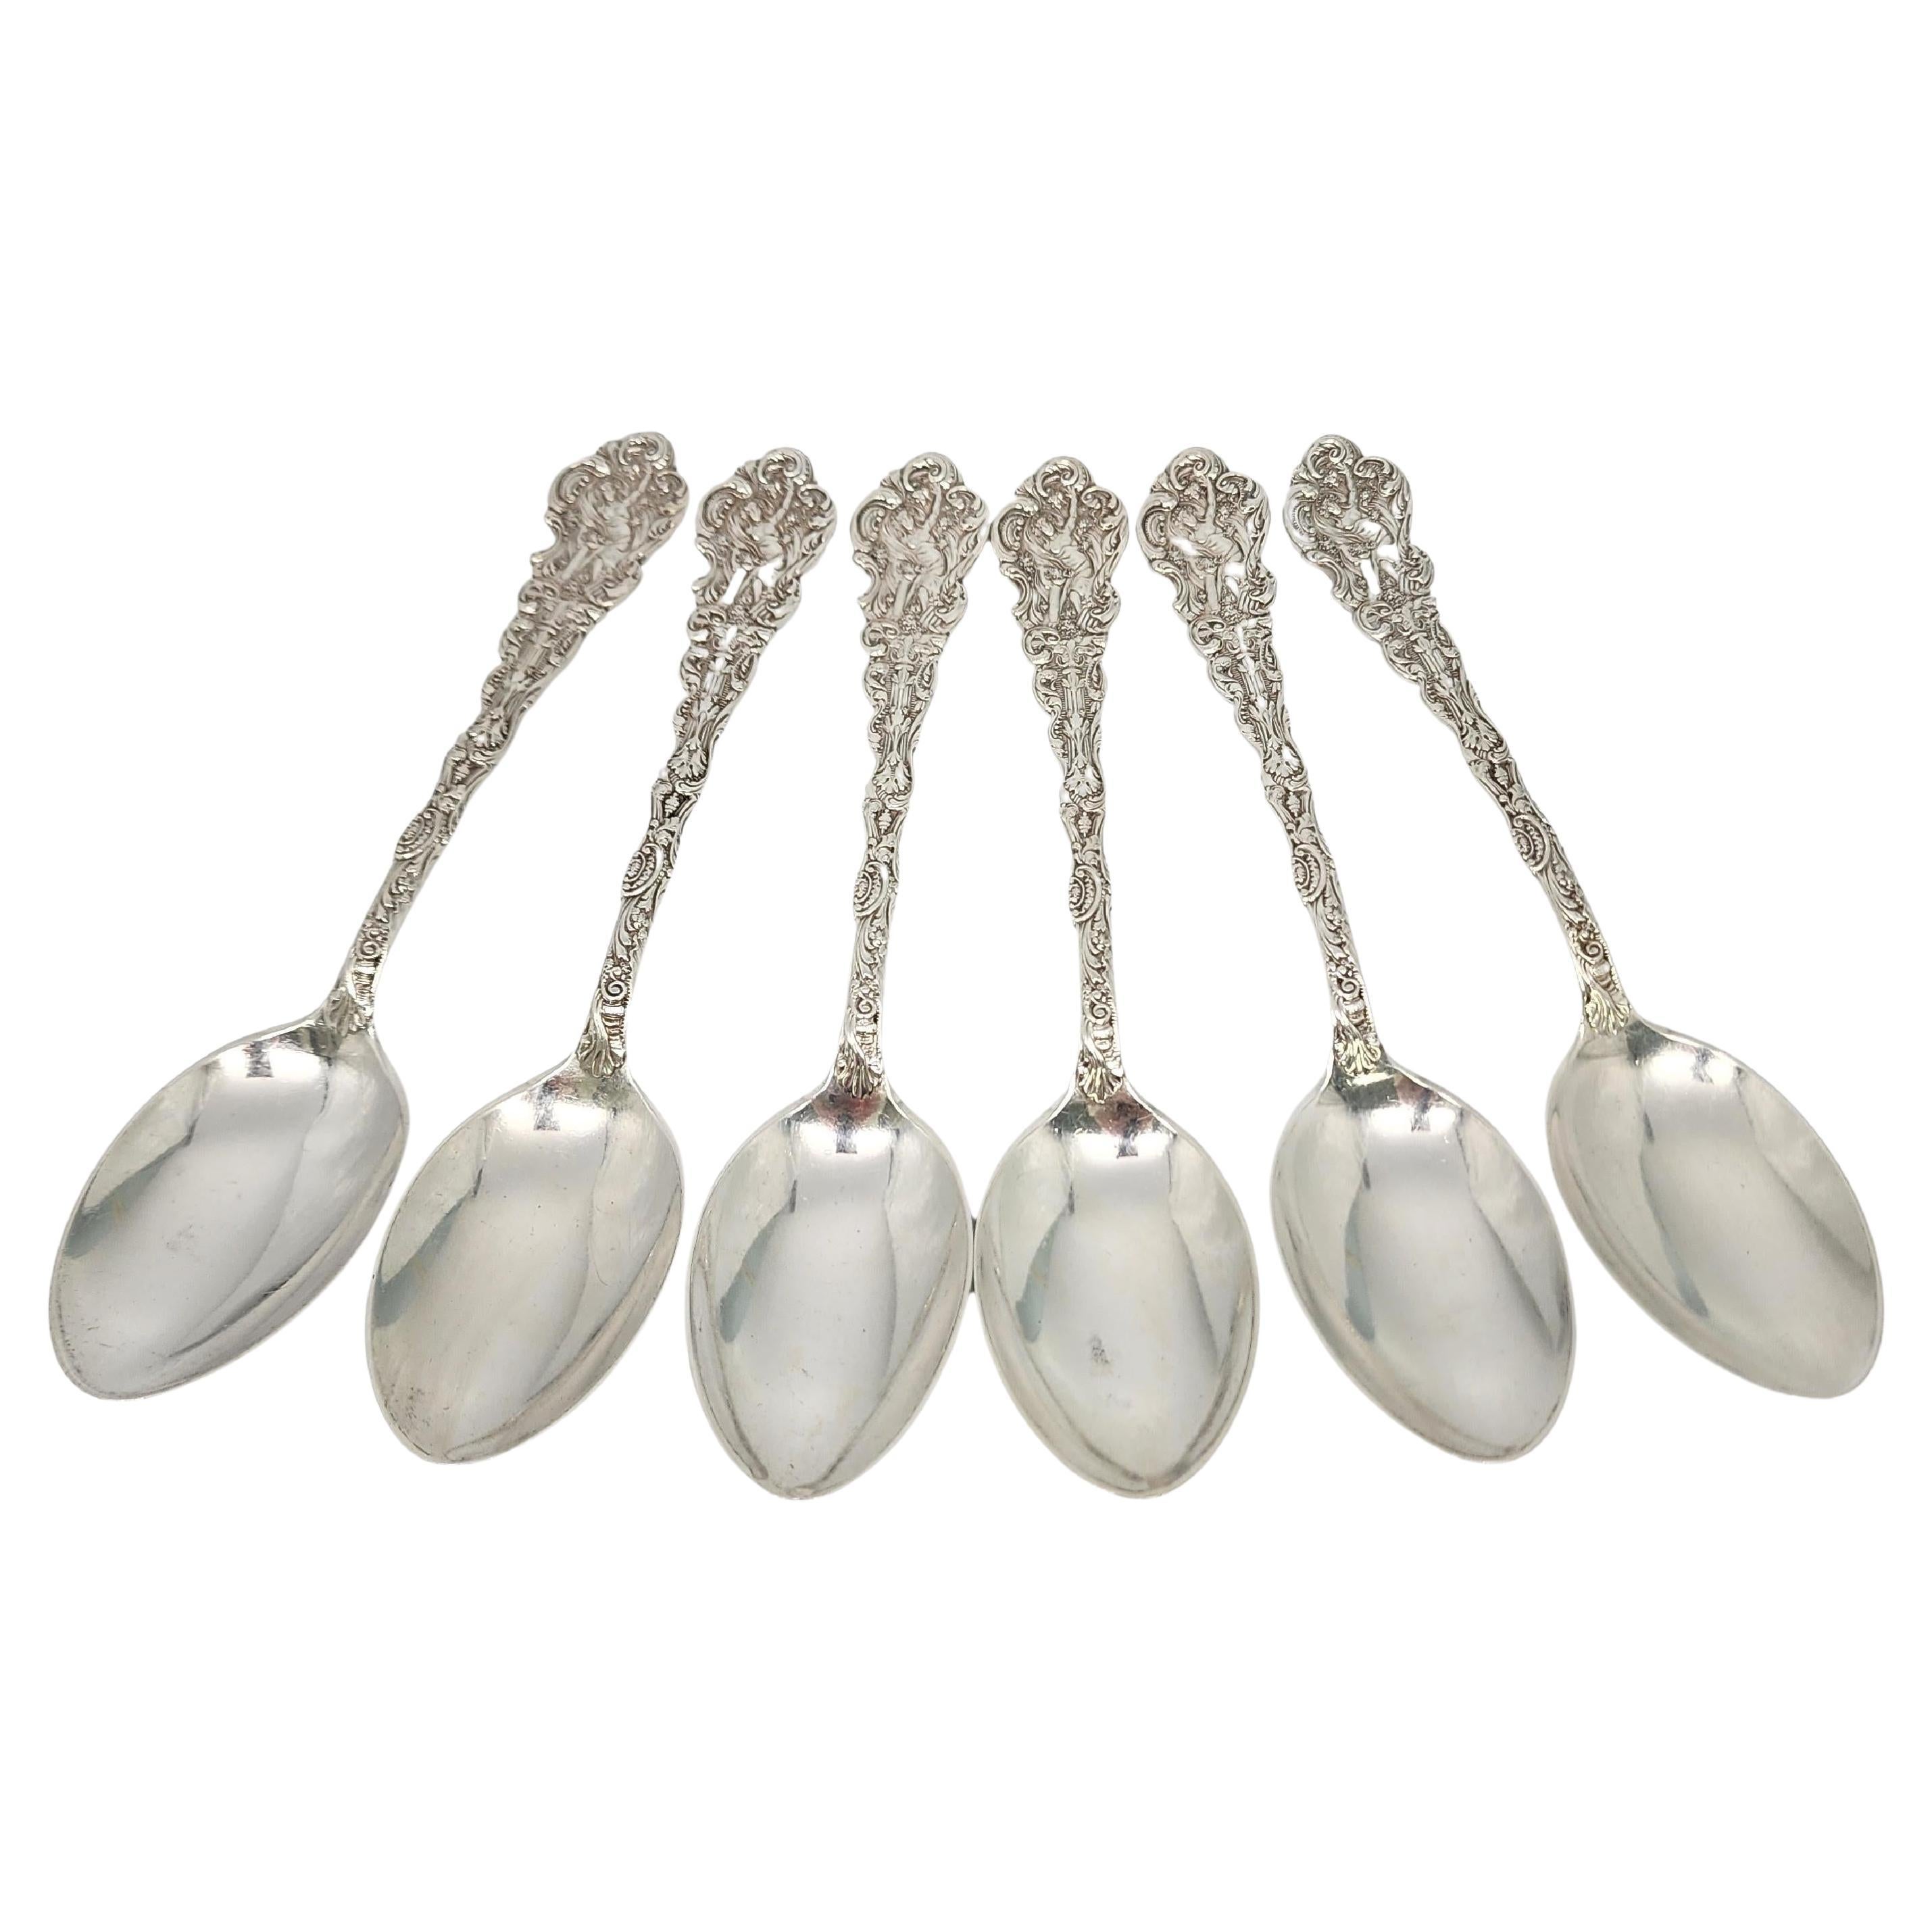 6 Gorham Versailles Sterling Silver Dessert Oval Soup Spoons 7 1/8" Mono #17141 For Sale